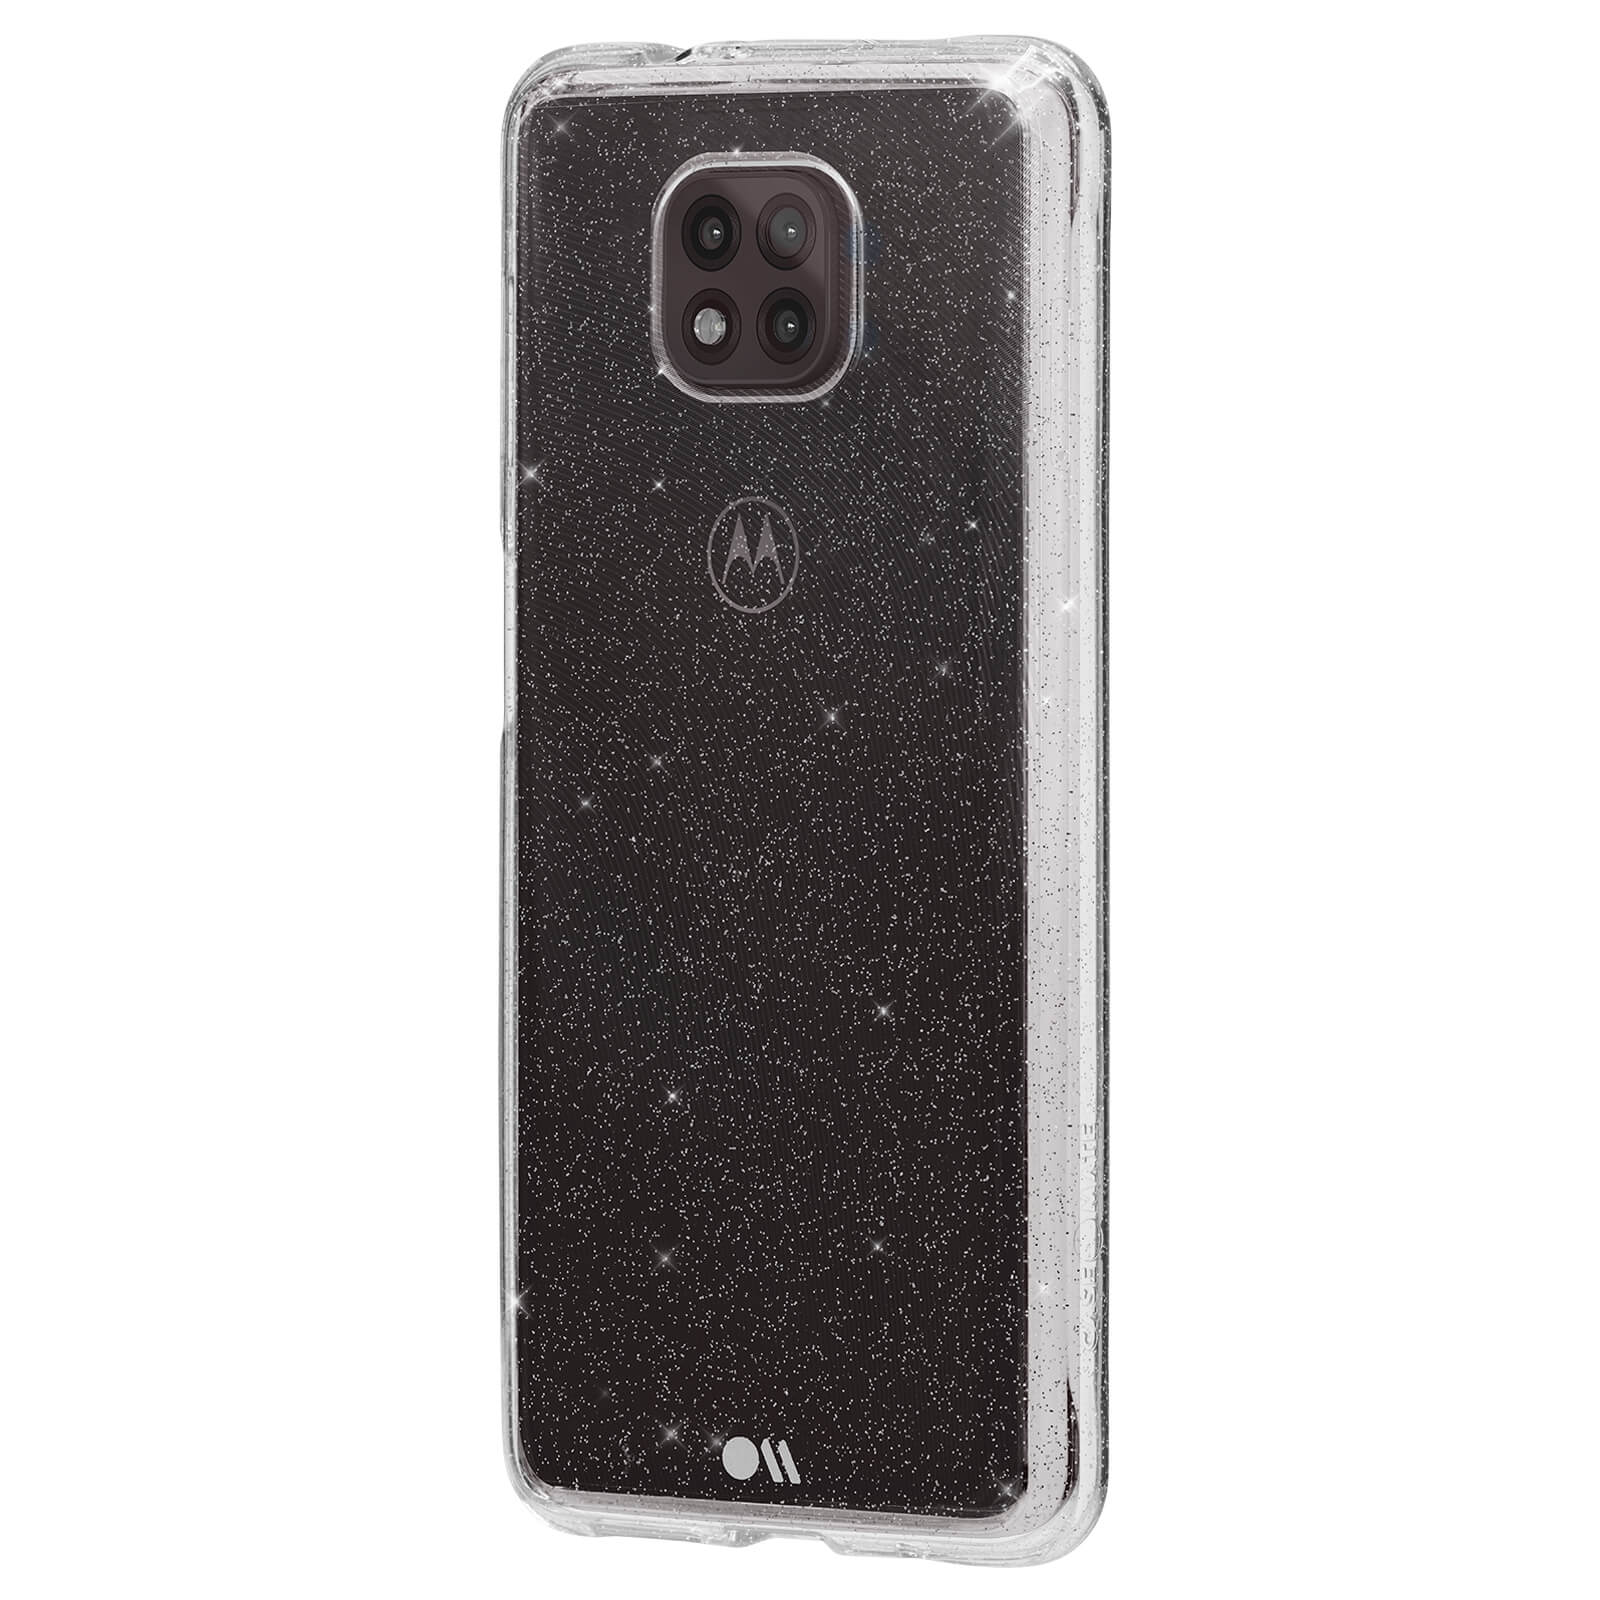 Sheer Crystal case for Moto G Power. color::Clear